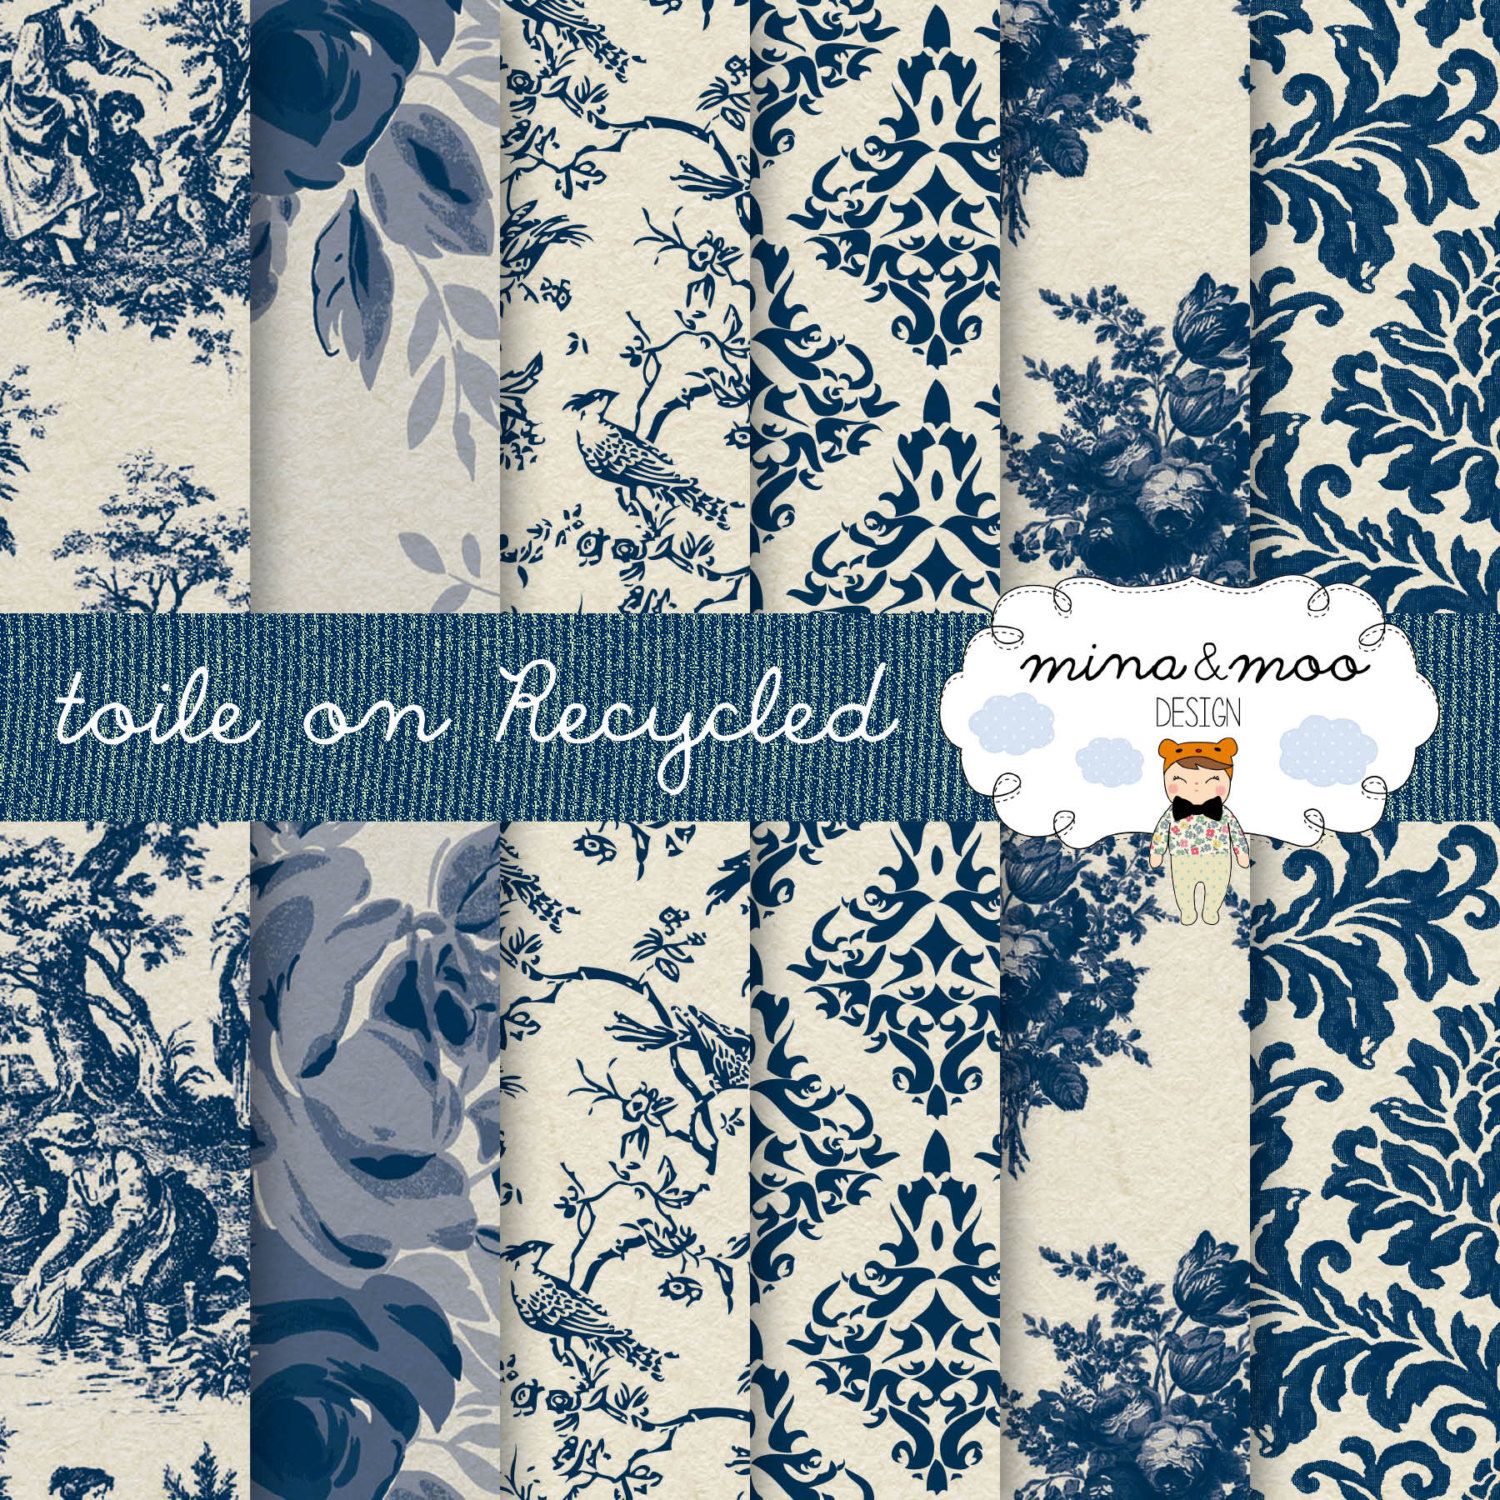 Popular items for toile fabric on Etsy